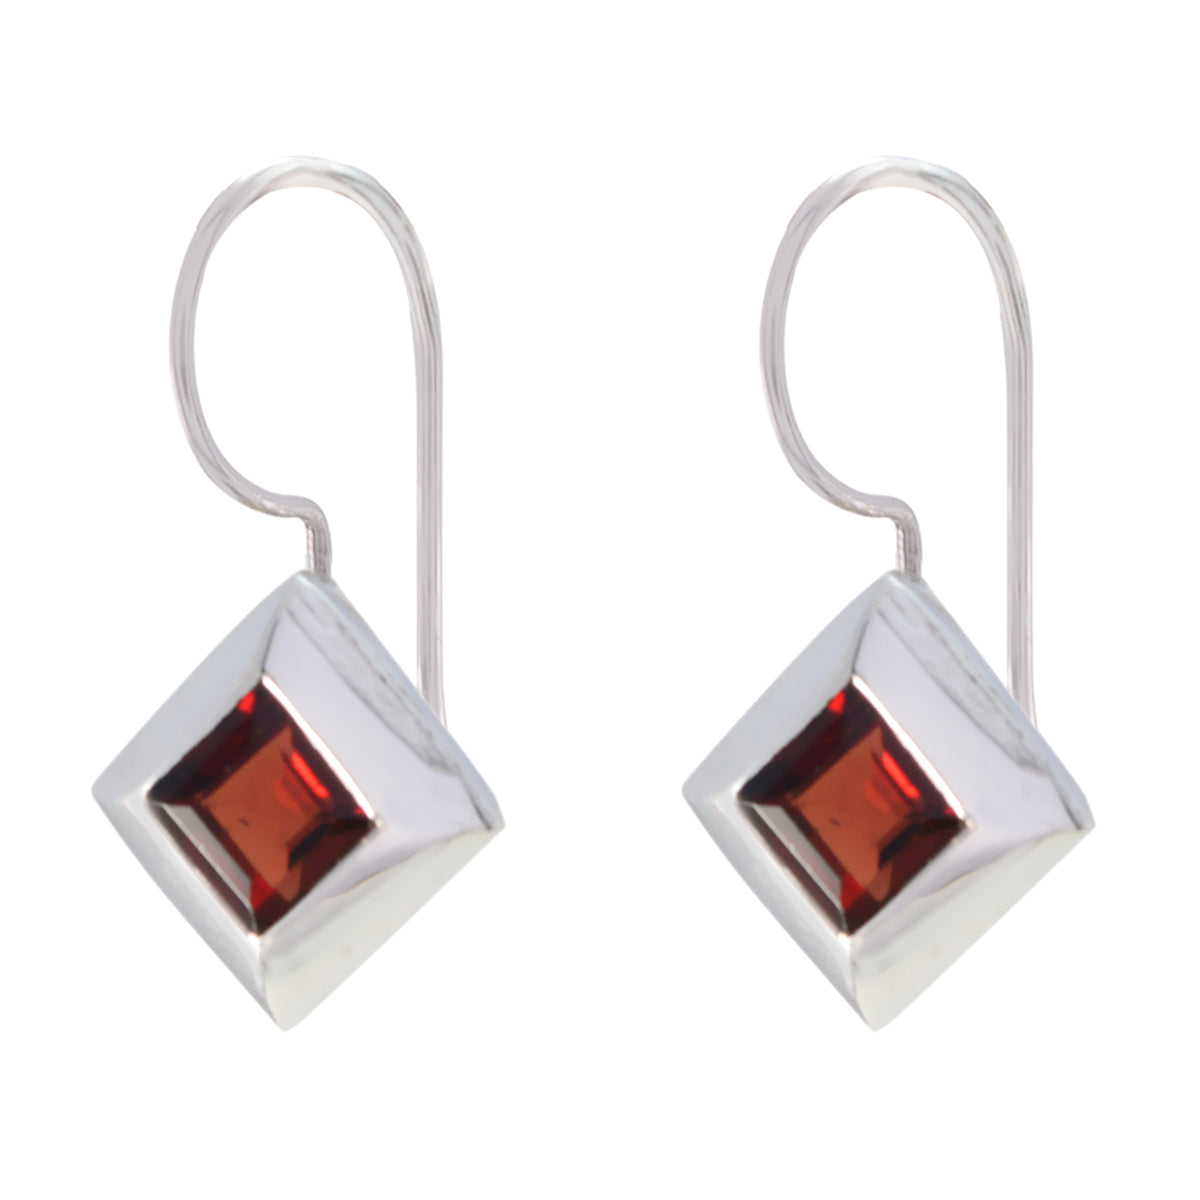 Riyo Natural Gemstone square Faceted Red Garnet Silver Earring gift for christmas